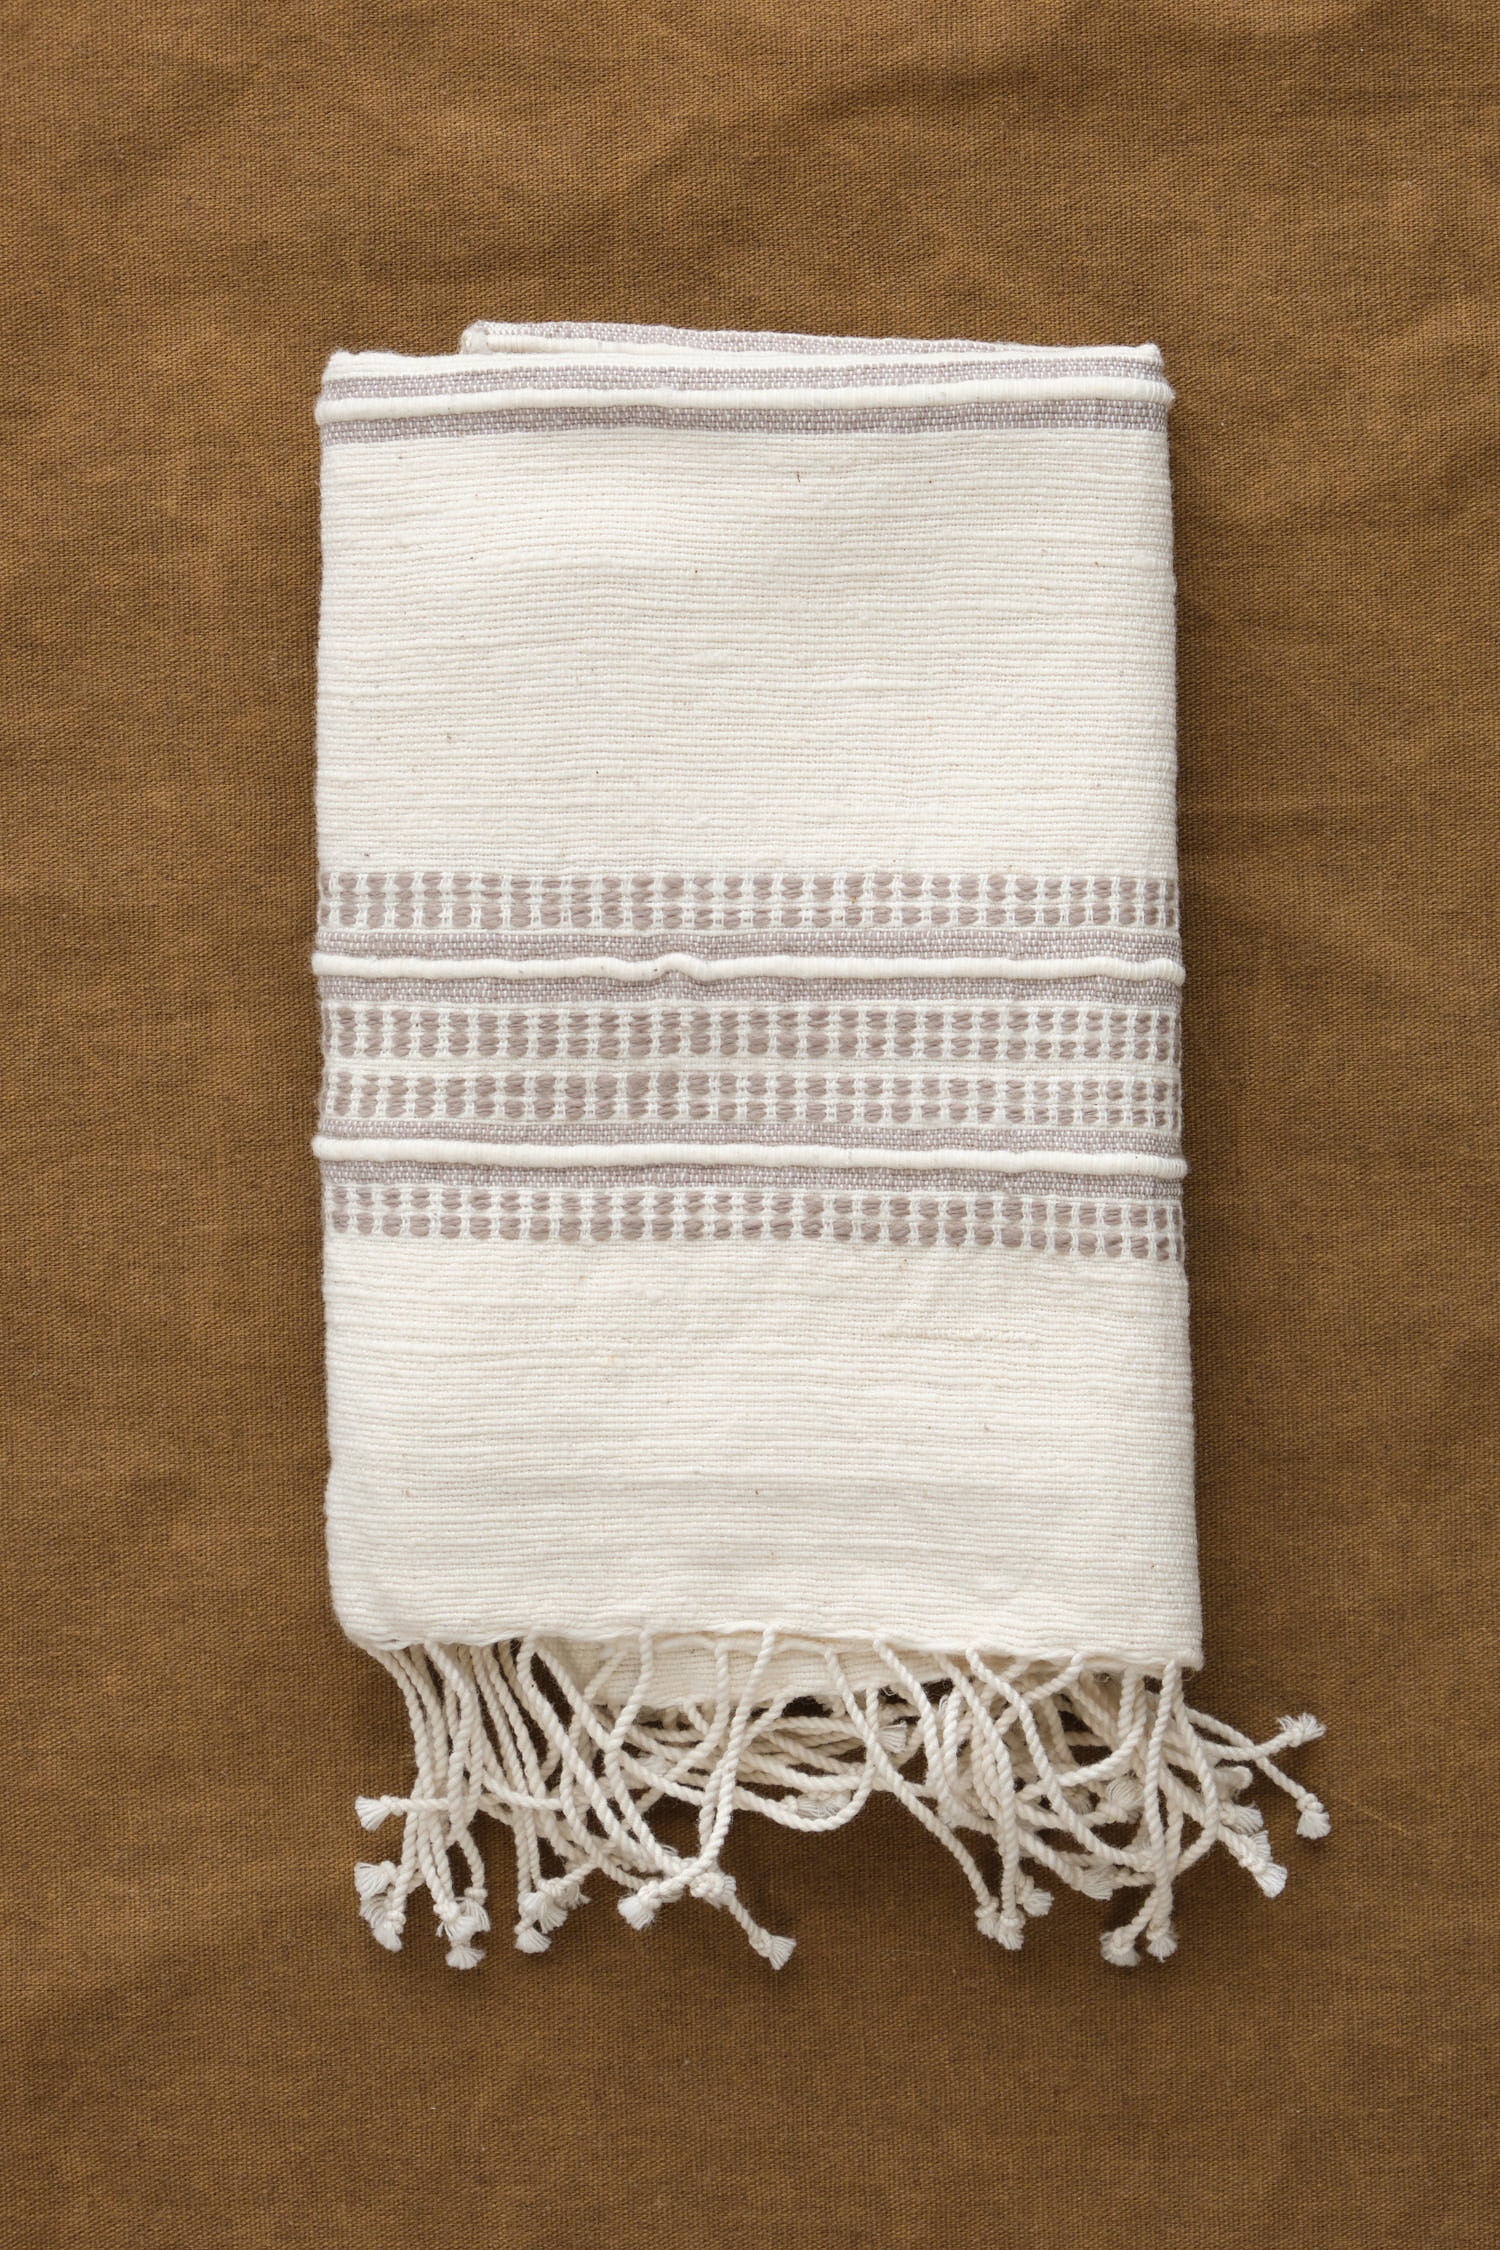 Aden Stripes Hand Towel natural with stone